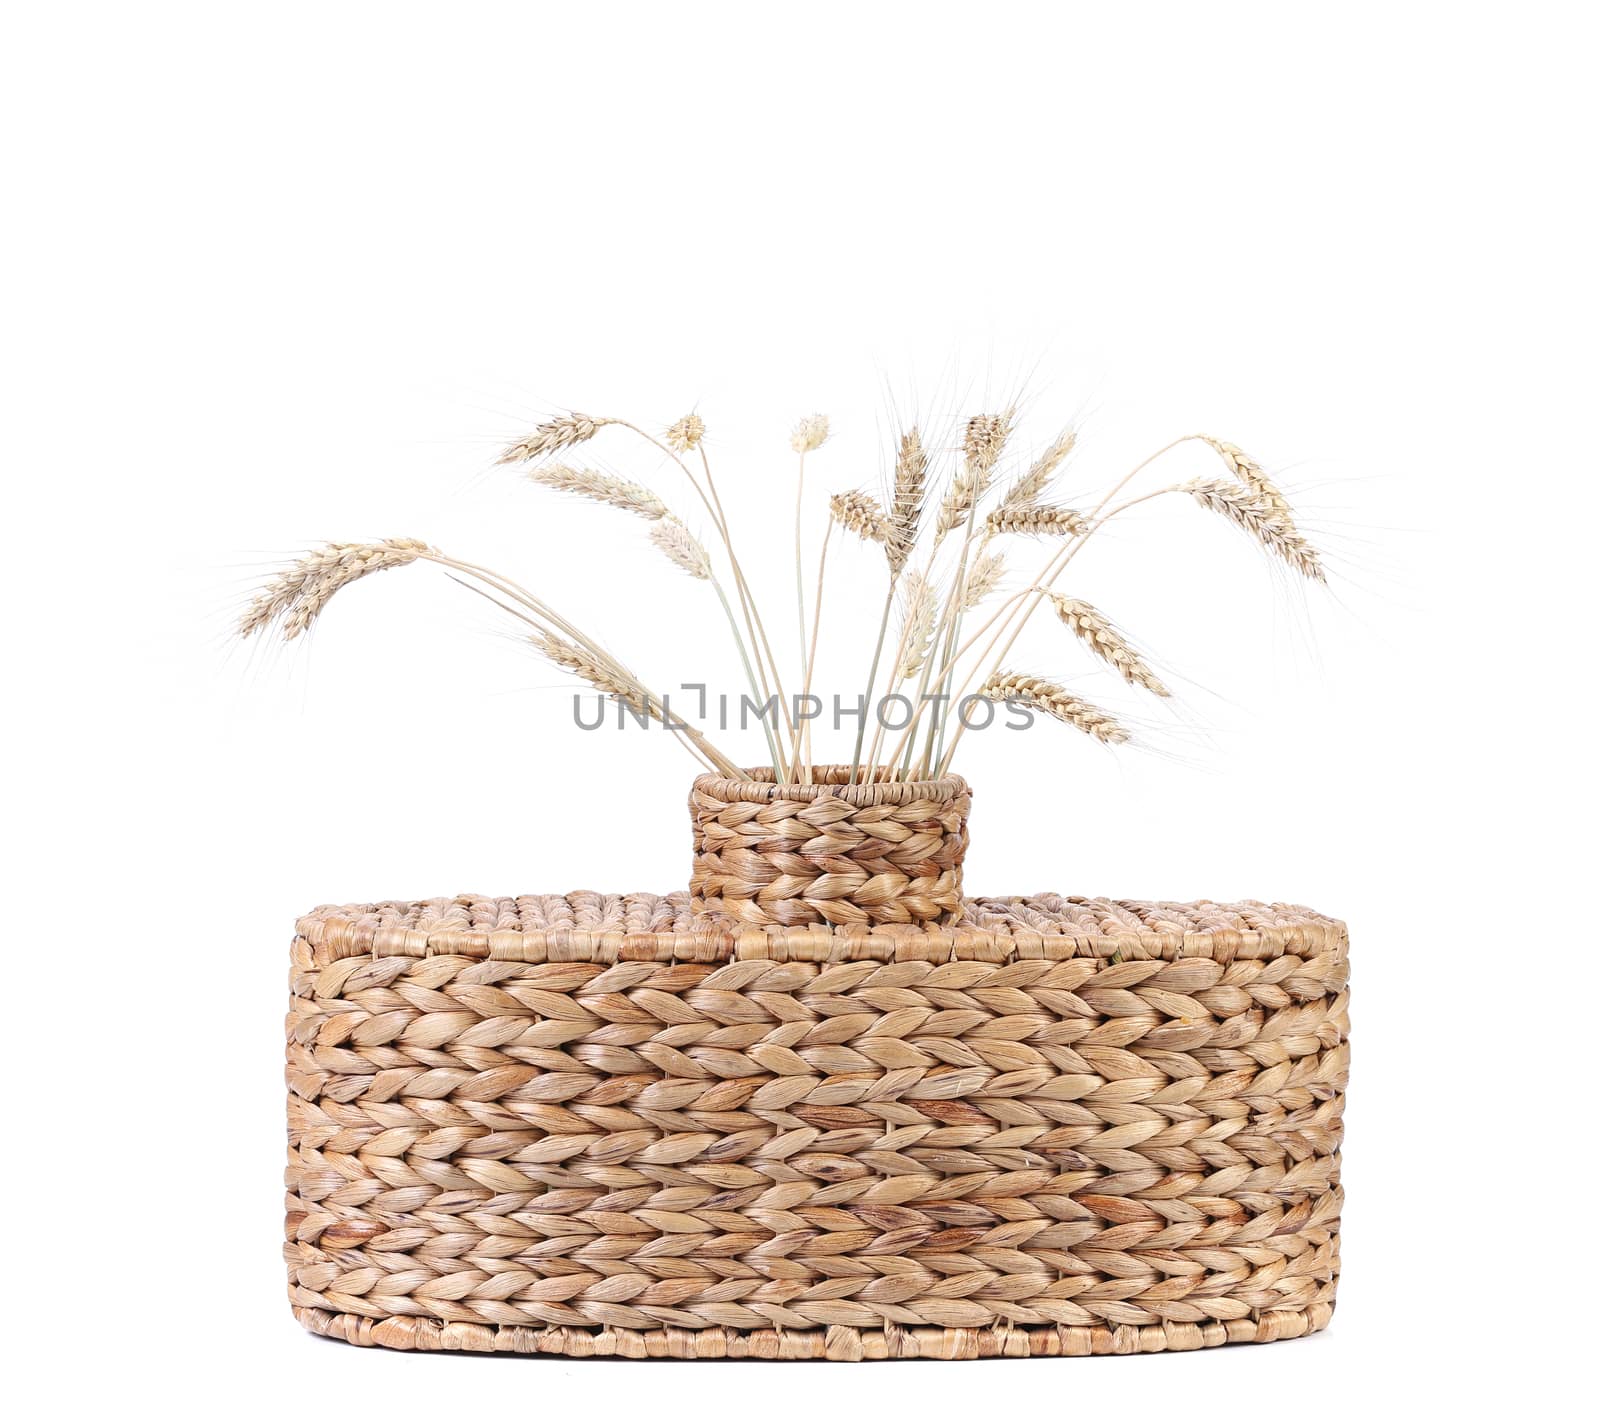 Wicker vase with wheat ears. Isolated on a white background.